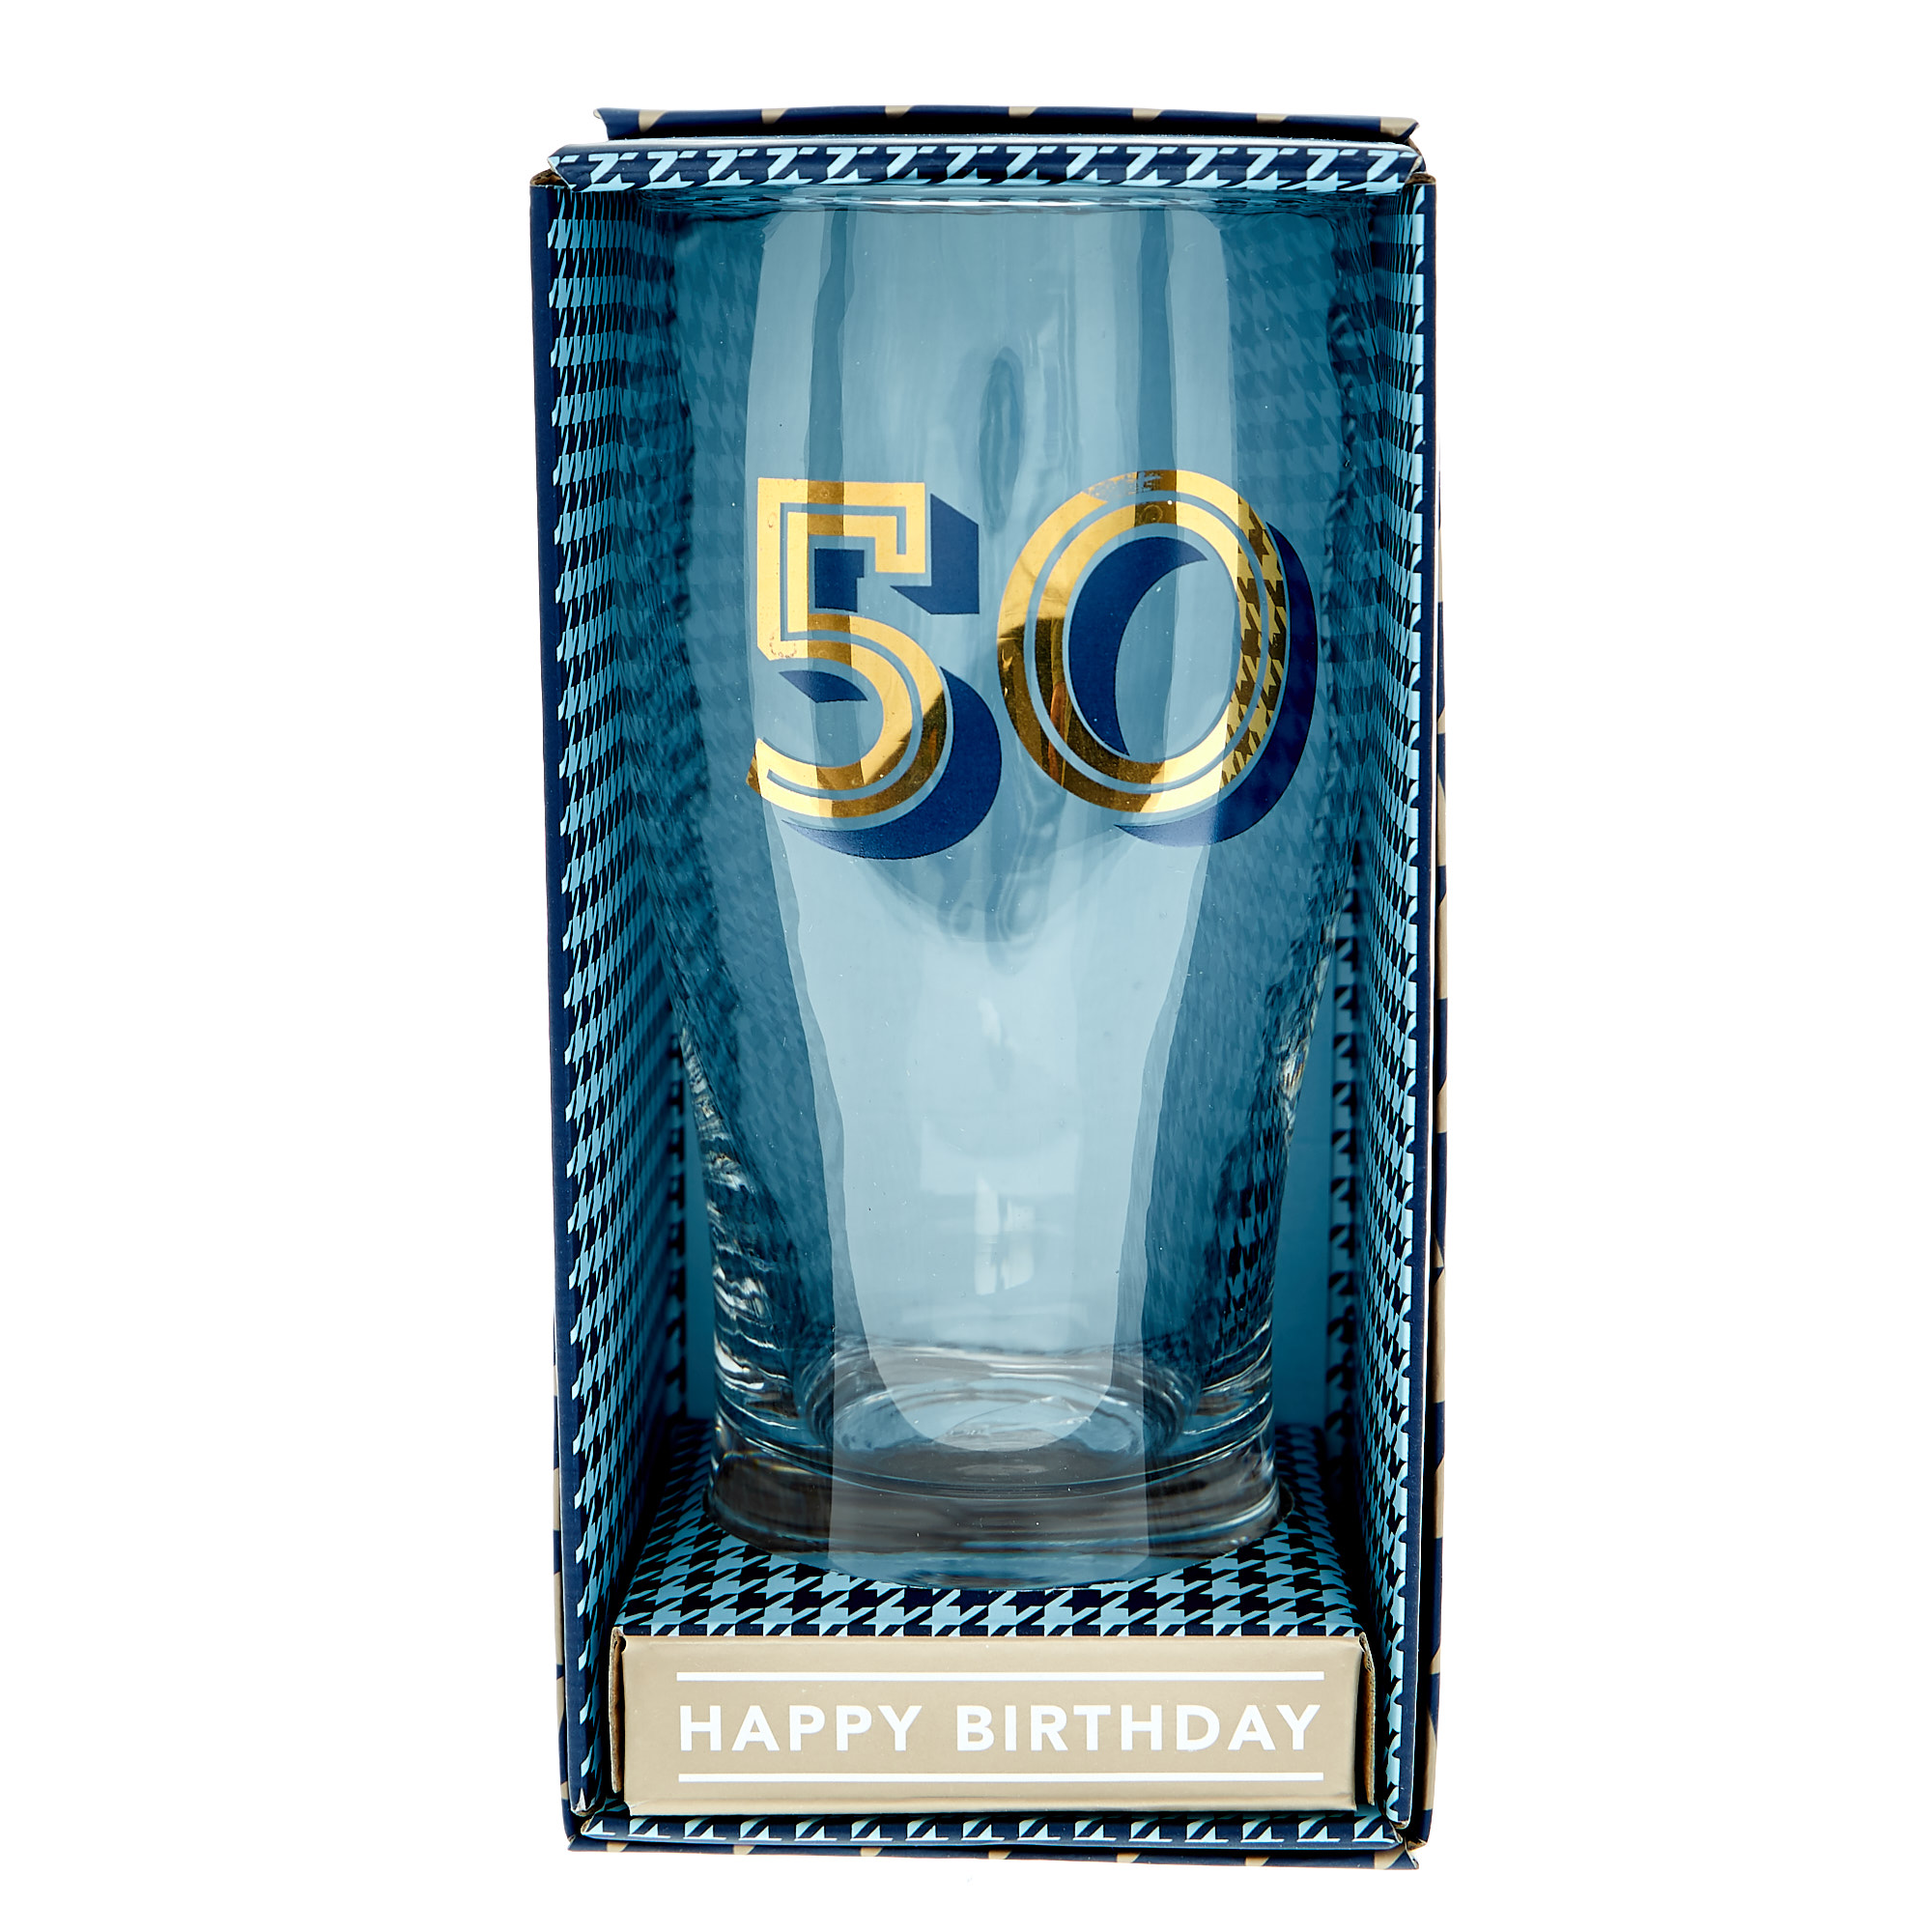 50th Birthday Pint Glass In A Box - Blue & Gold